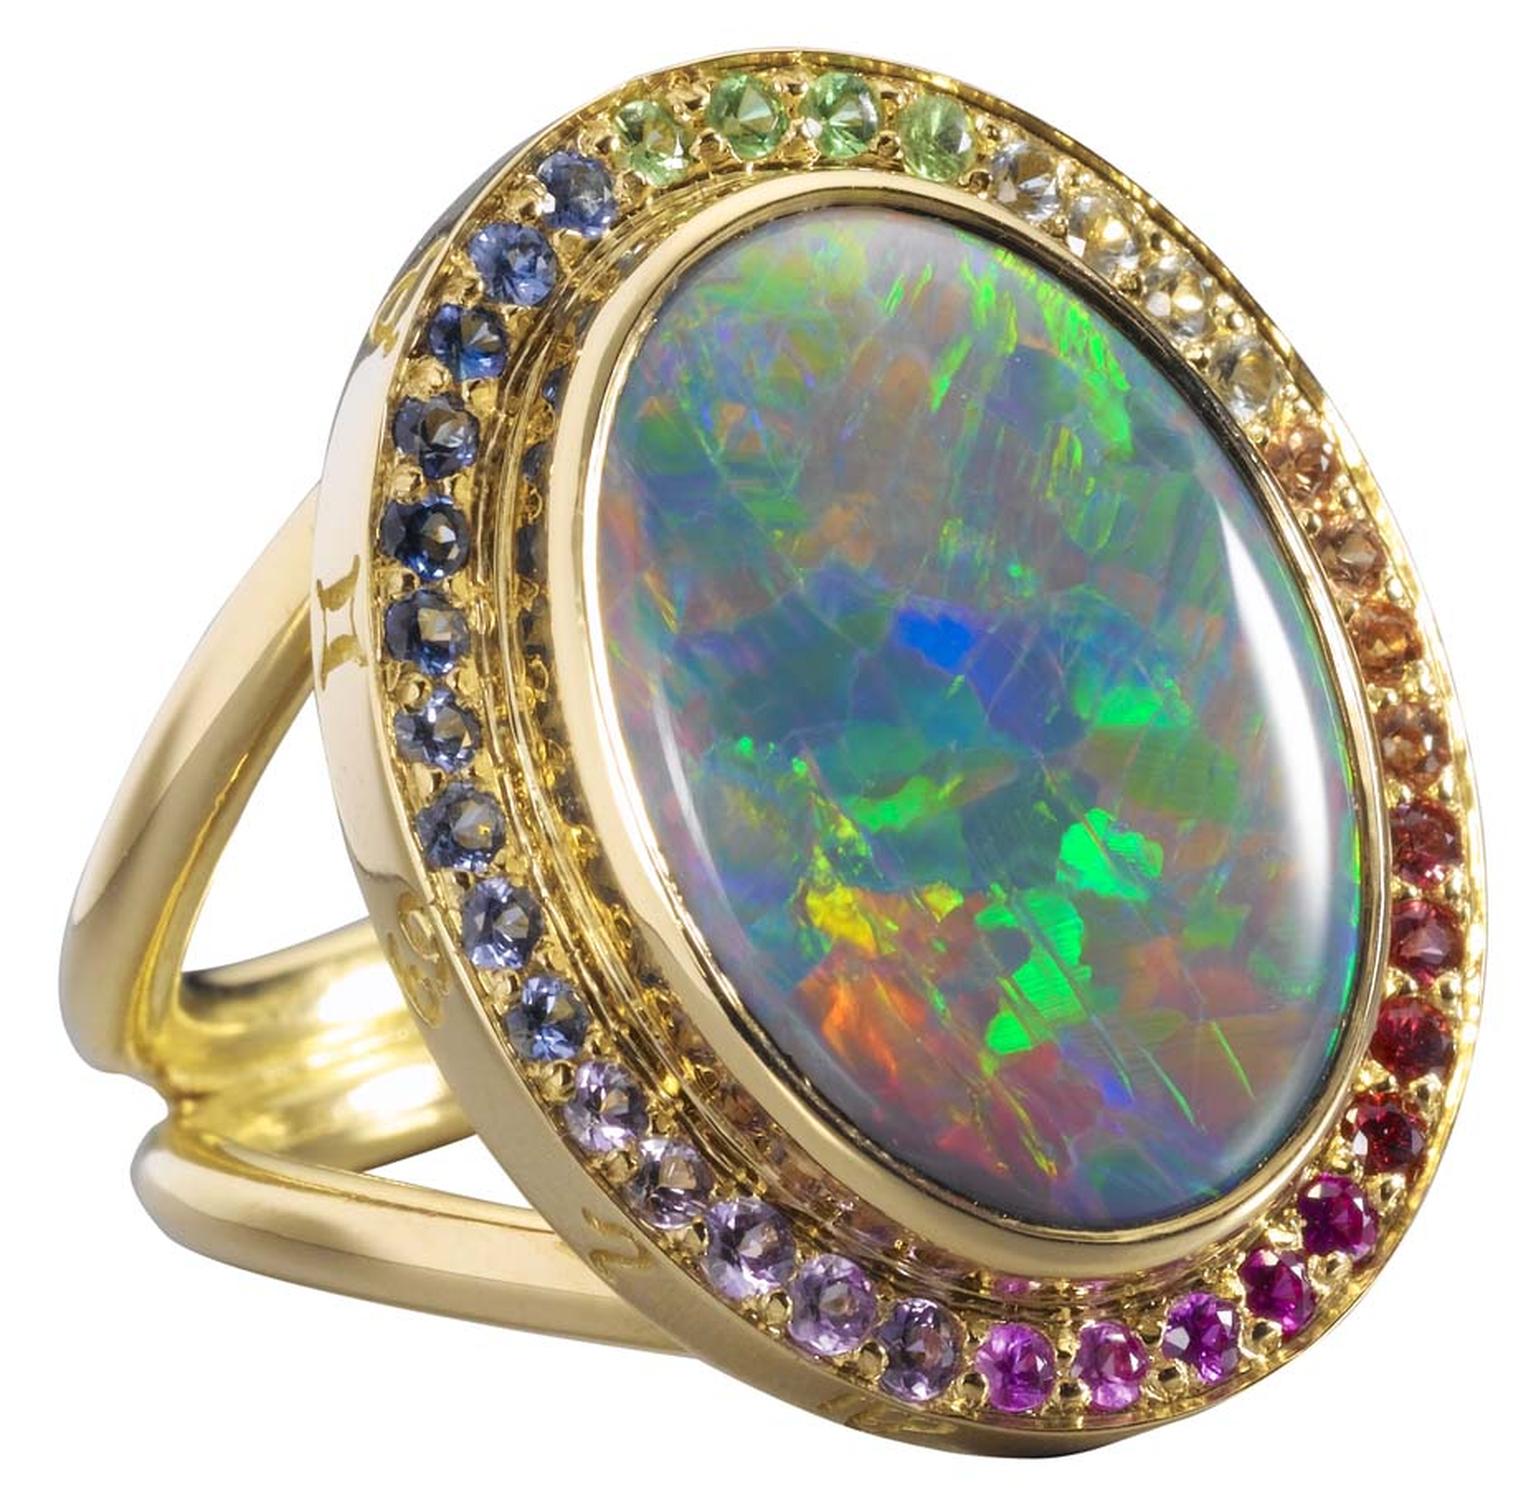 Temple St. Clair gold Astrid ring with black opal and mix colour sapphire